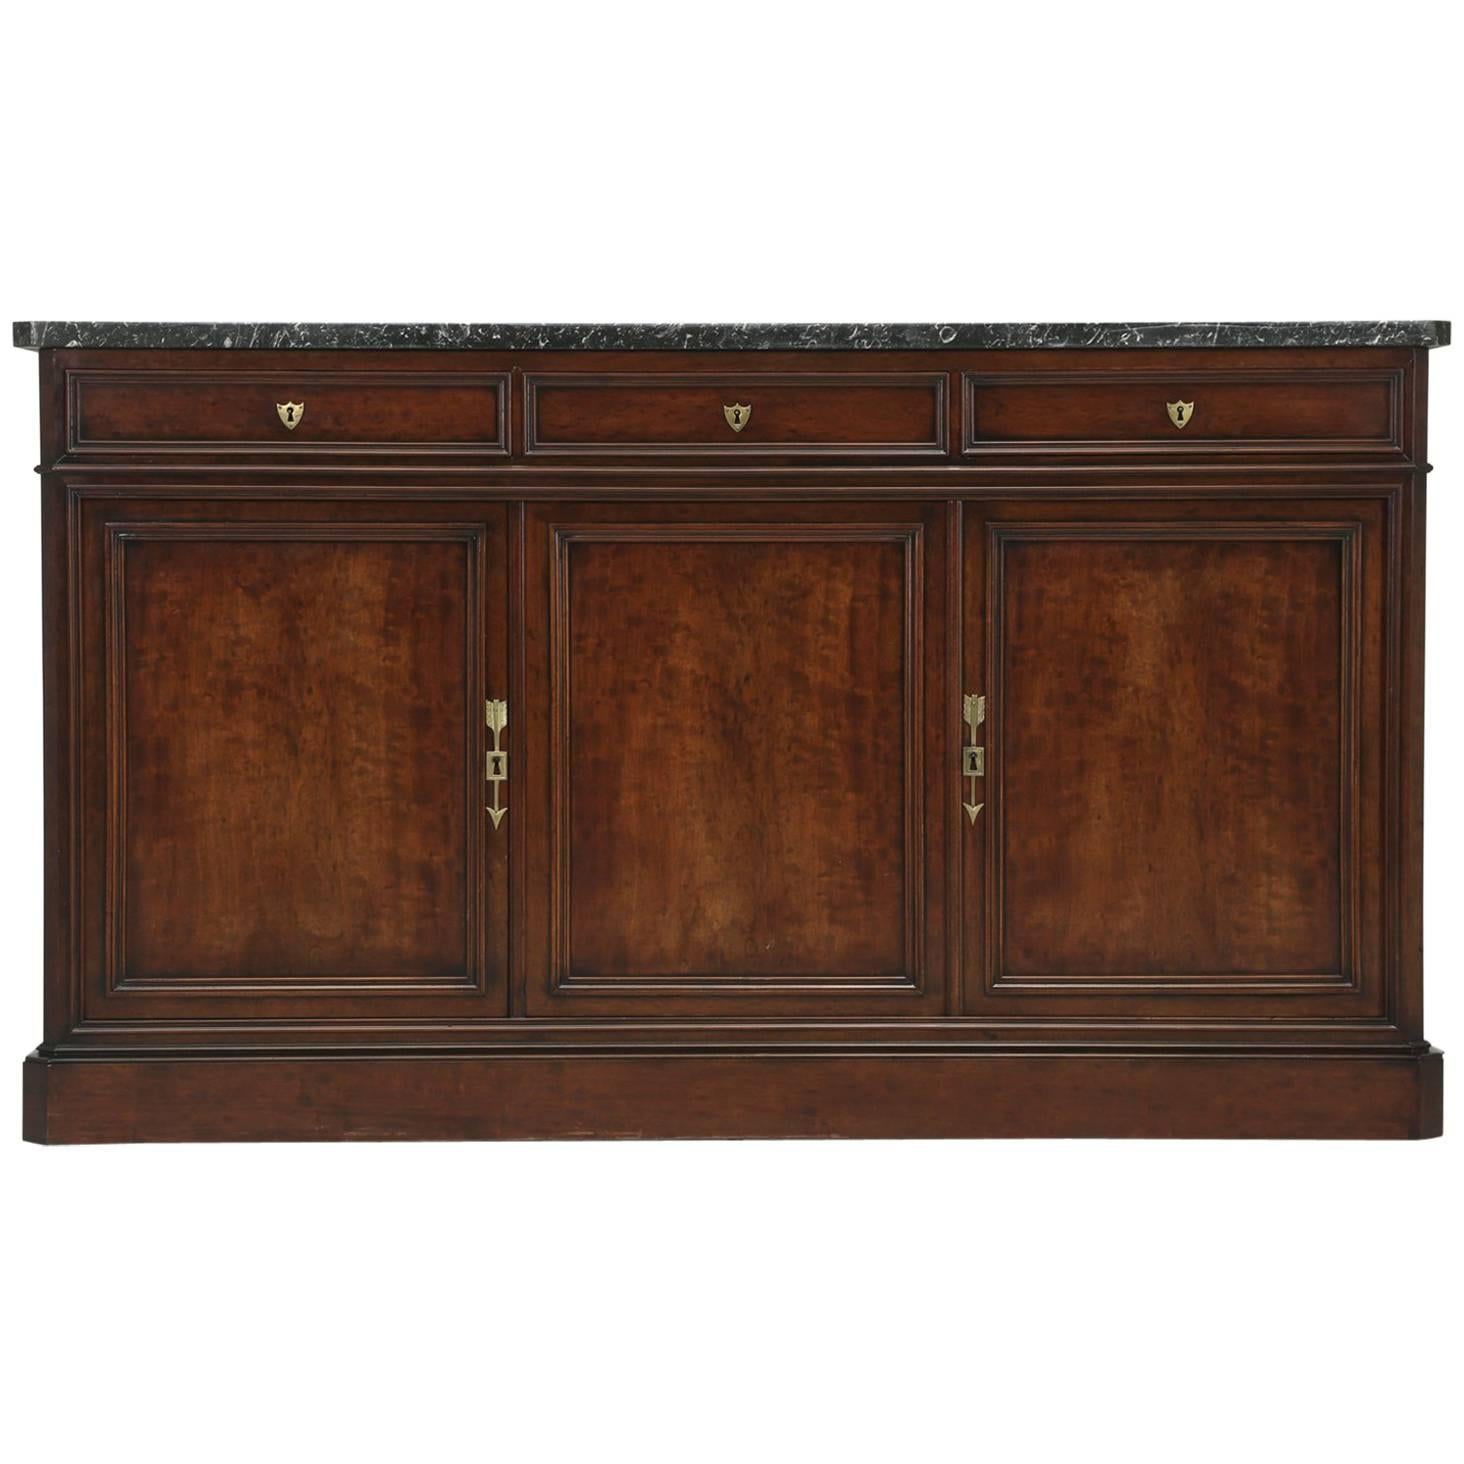 Antique French Buffet, or Sideboard with a Thick Marble Top, circa 1800s